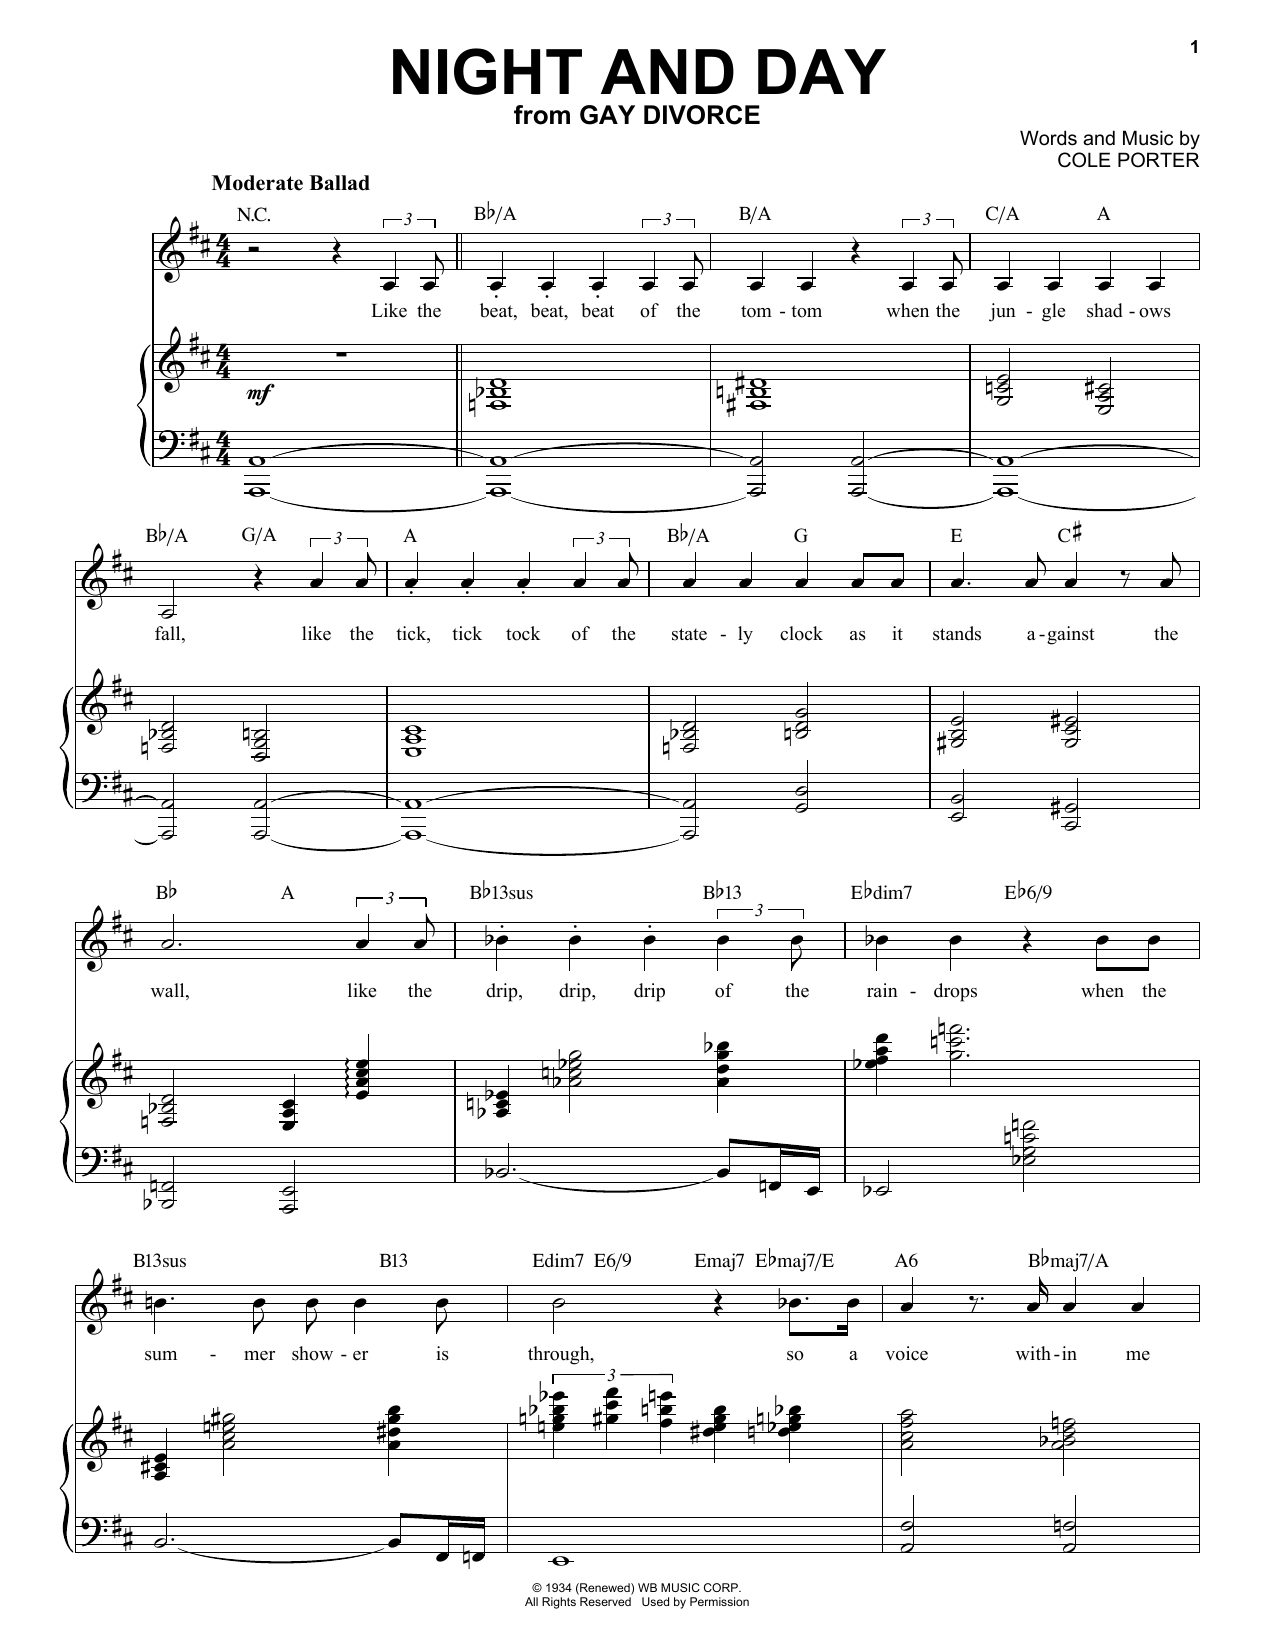 Frank Sinatra Night And Day sheet music notes and chords. Download Printable PDF.